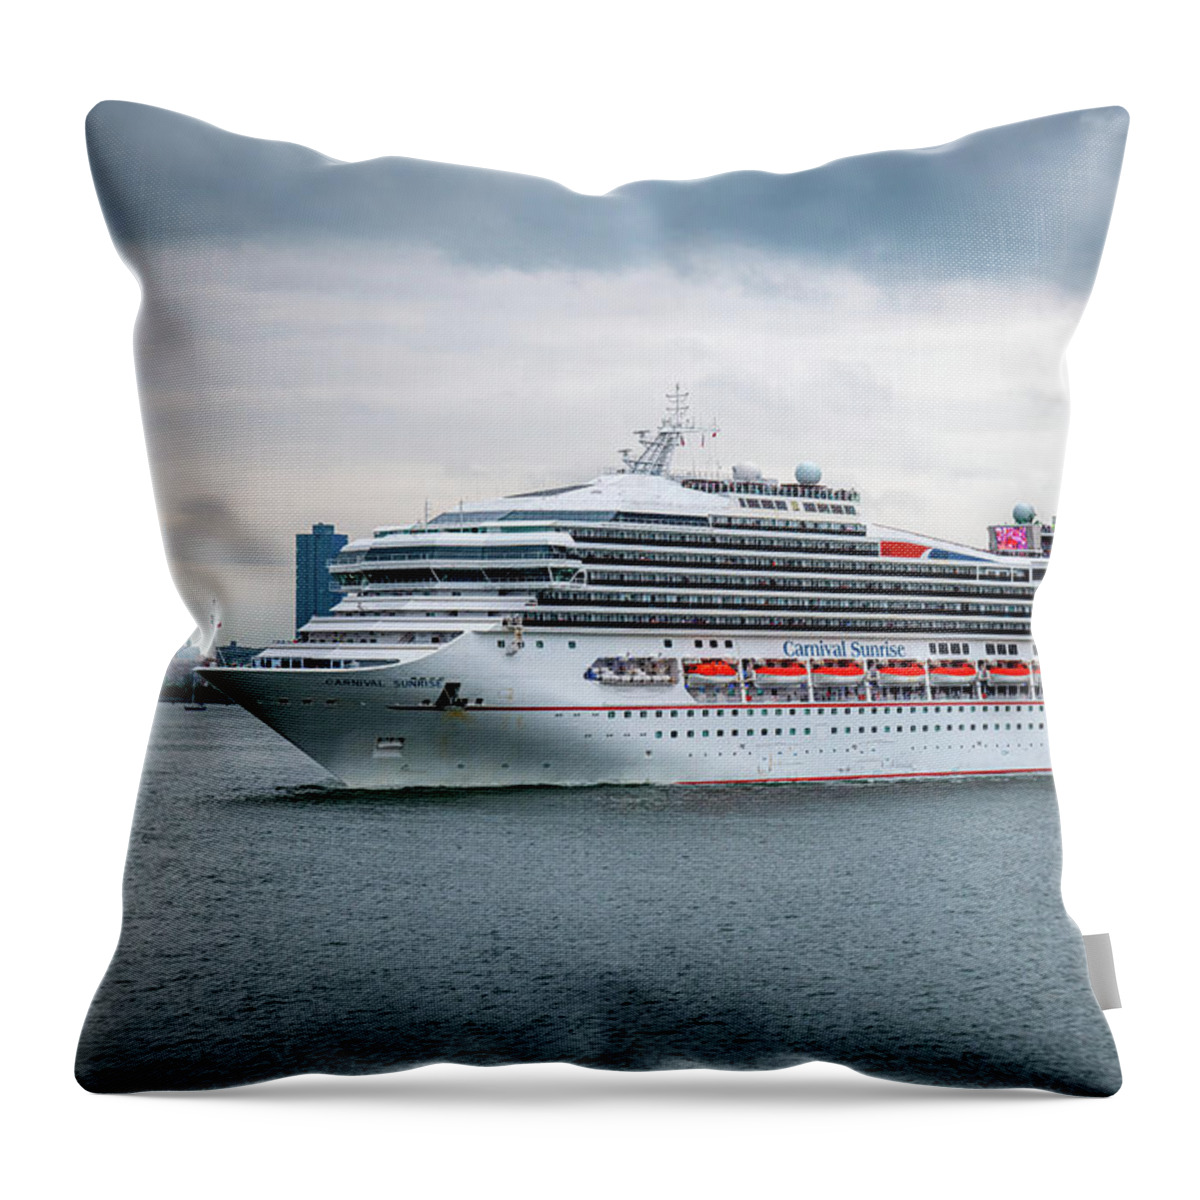 Carnival Cruises Throw Pillow featuring the photograph Carnival Sunrise by Robert J Wagner